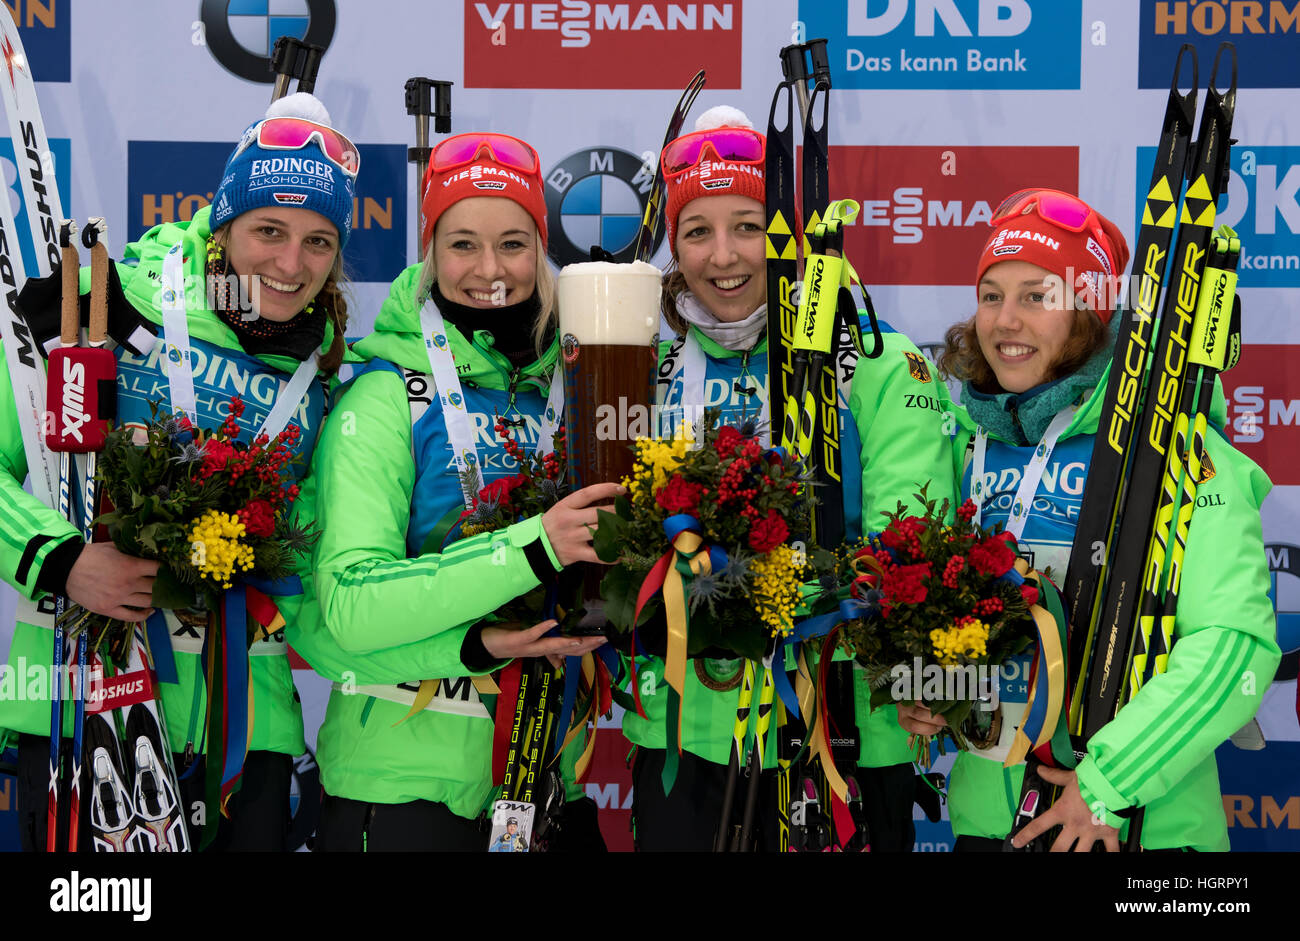 Ruhpolding, Germany. 12th Jan, 2017. L-R: German biathletes Vanessa Hinz, Maren Hammerschmidt, Franziska Preuss and Laura Dahlmeier on the victor's podium after taking first place in the 4 x 6 kilometer women's relay race at the Biathlon World Cup in the Chiemgau Arena in Ruhpolding, Germany, 12 January 2017. Germany finished in first place ahead of France and Norway. Photo: Matthias Balk/dpa/Alamy Live News Stock Photo